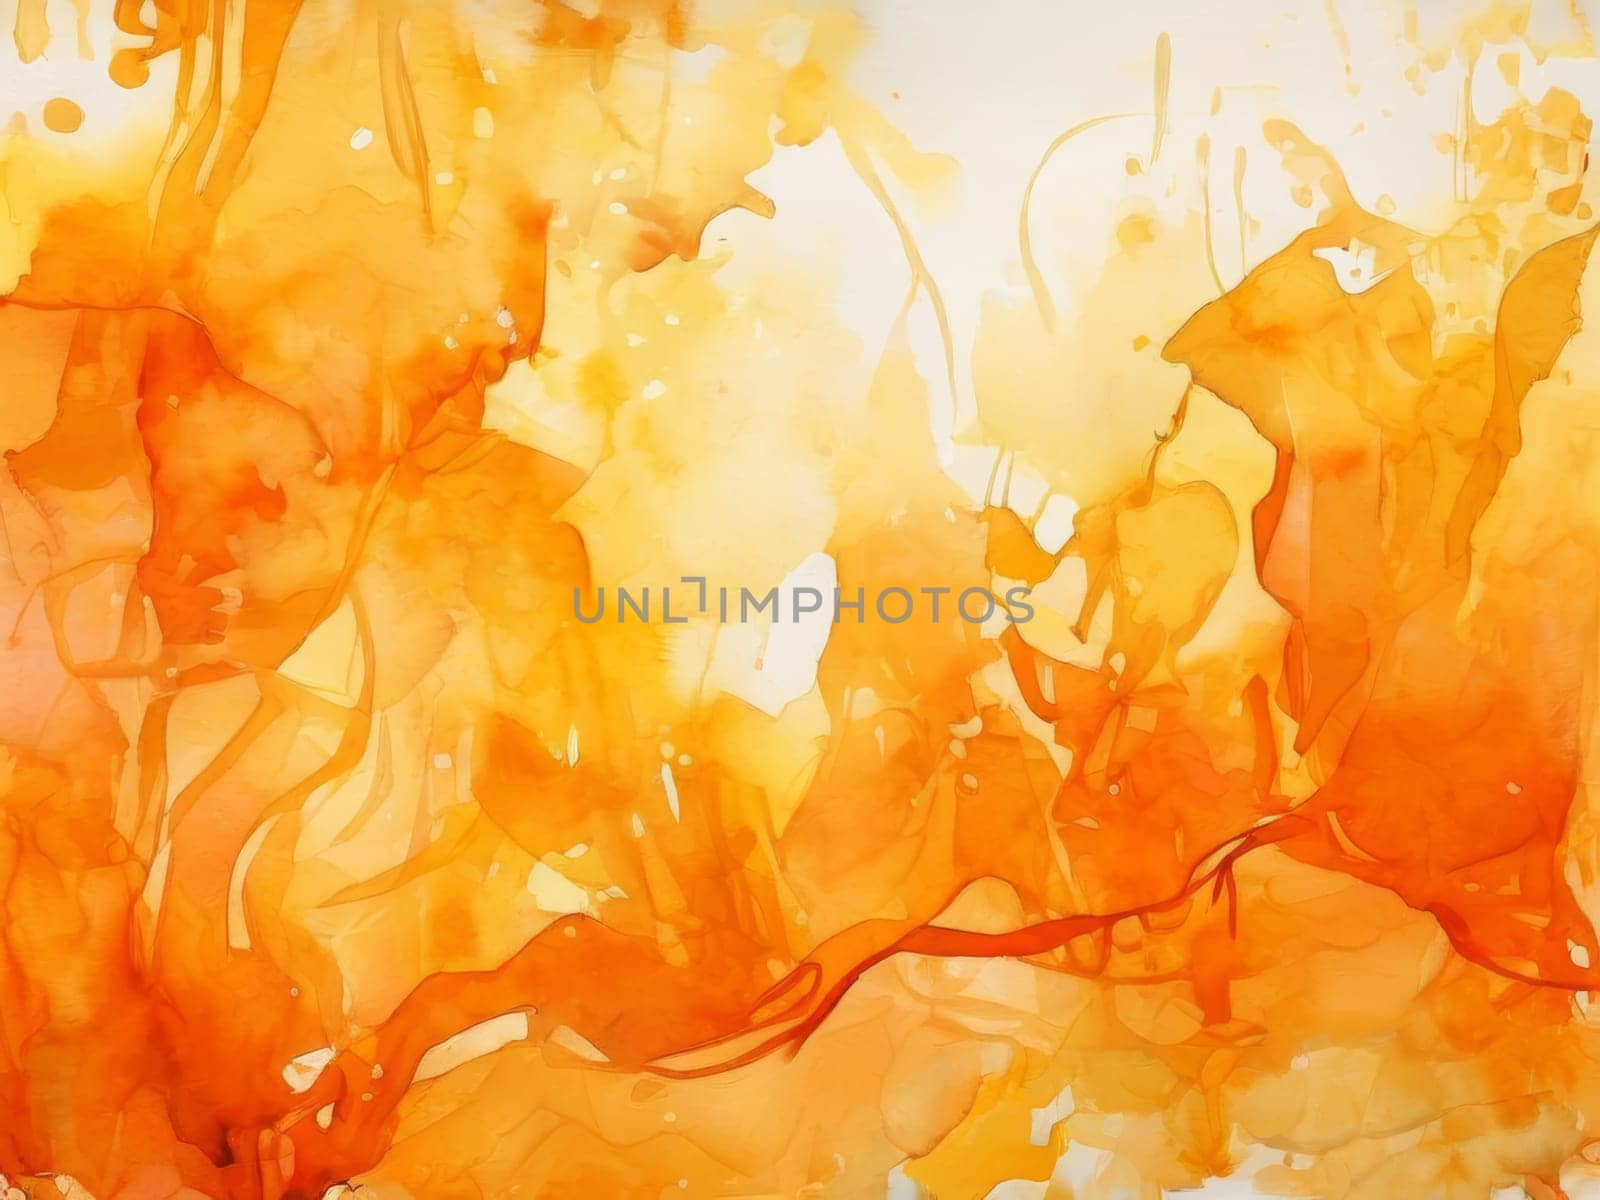 Orange watercolor background. Bright watercolor backdrop with orange brushes smears on white paper background as watercolor background with copy space.